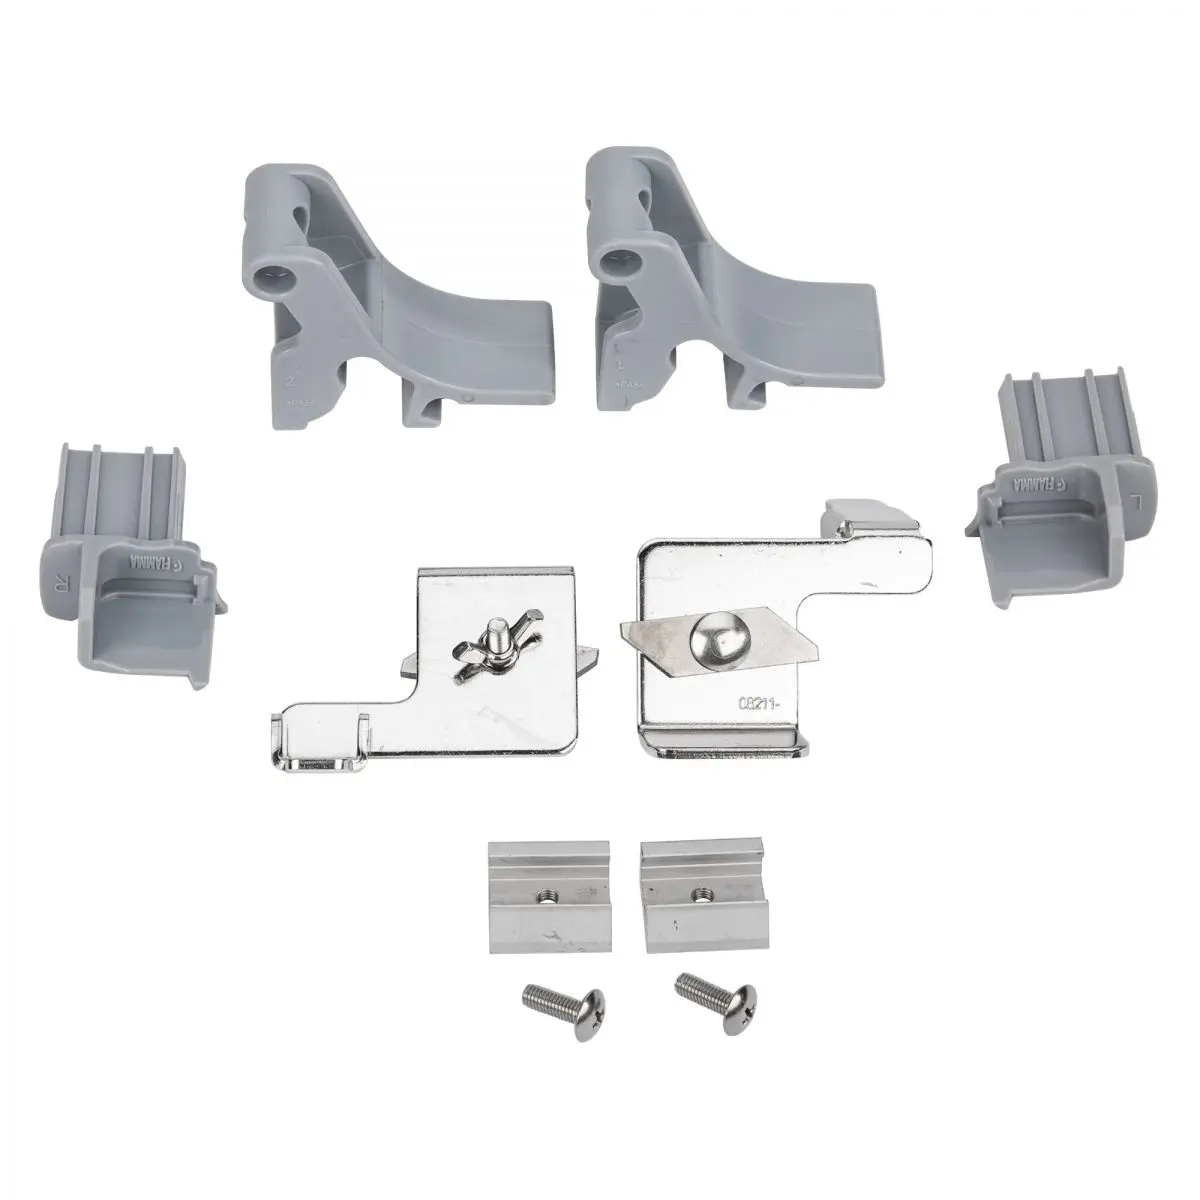 Fixing Fast Clip Set - Privacy Room F80-hoz